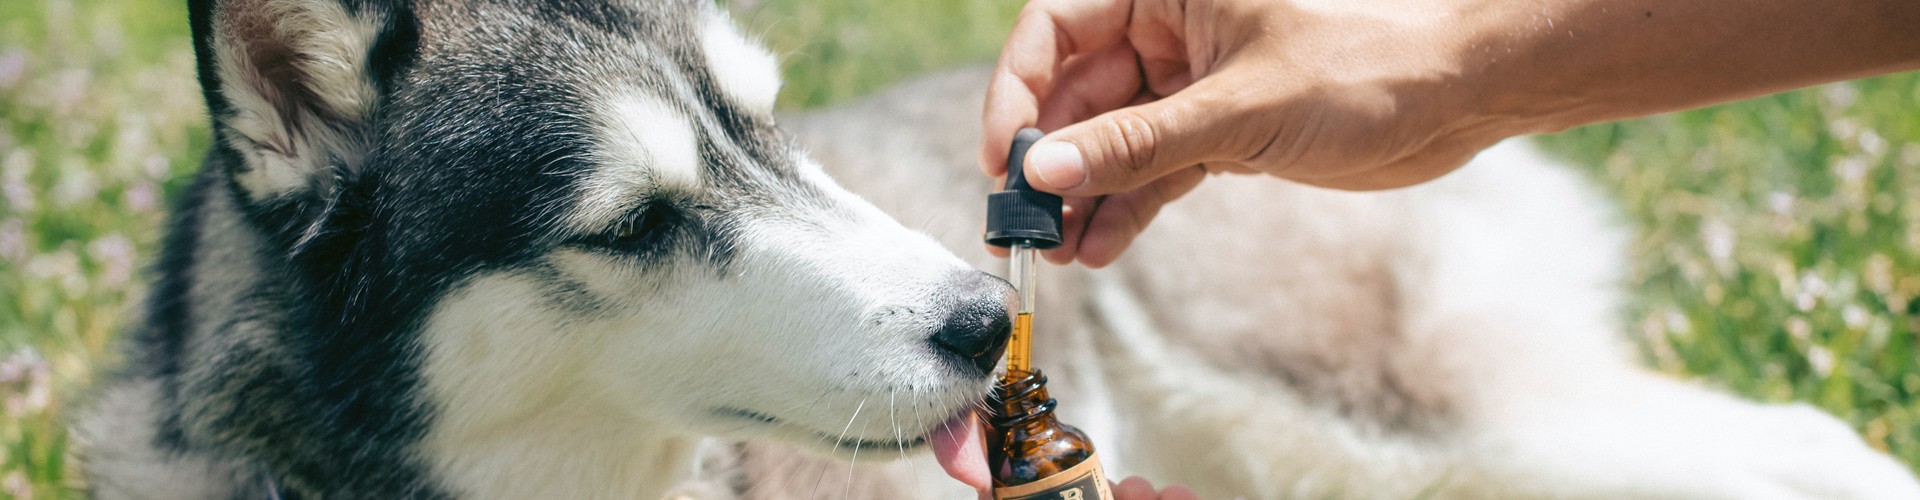 Best CBD products for healthy pets!